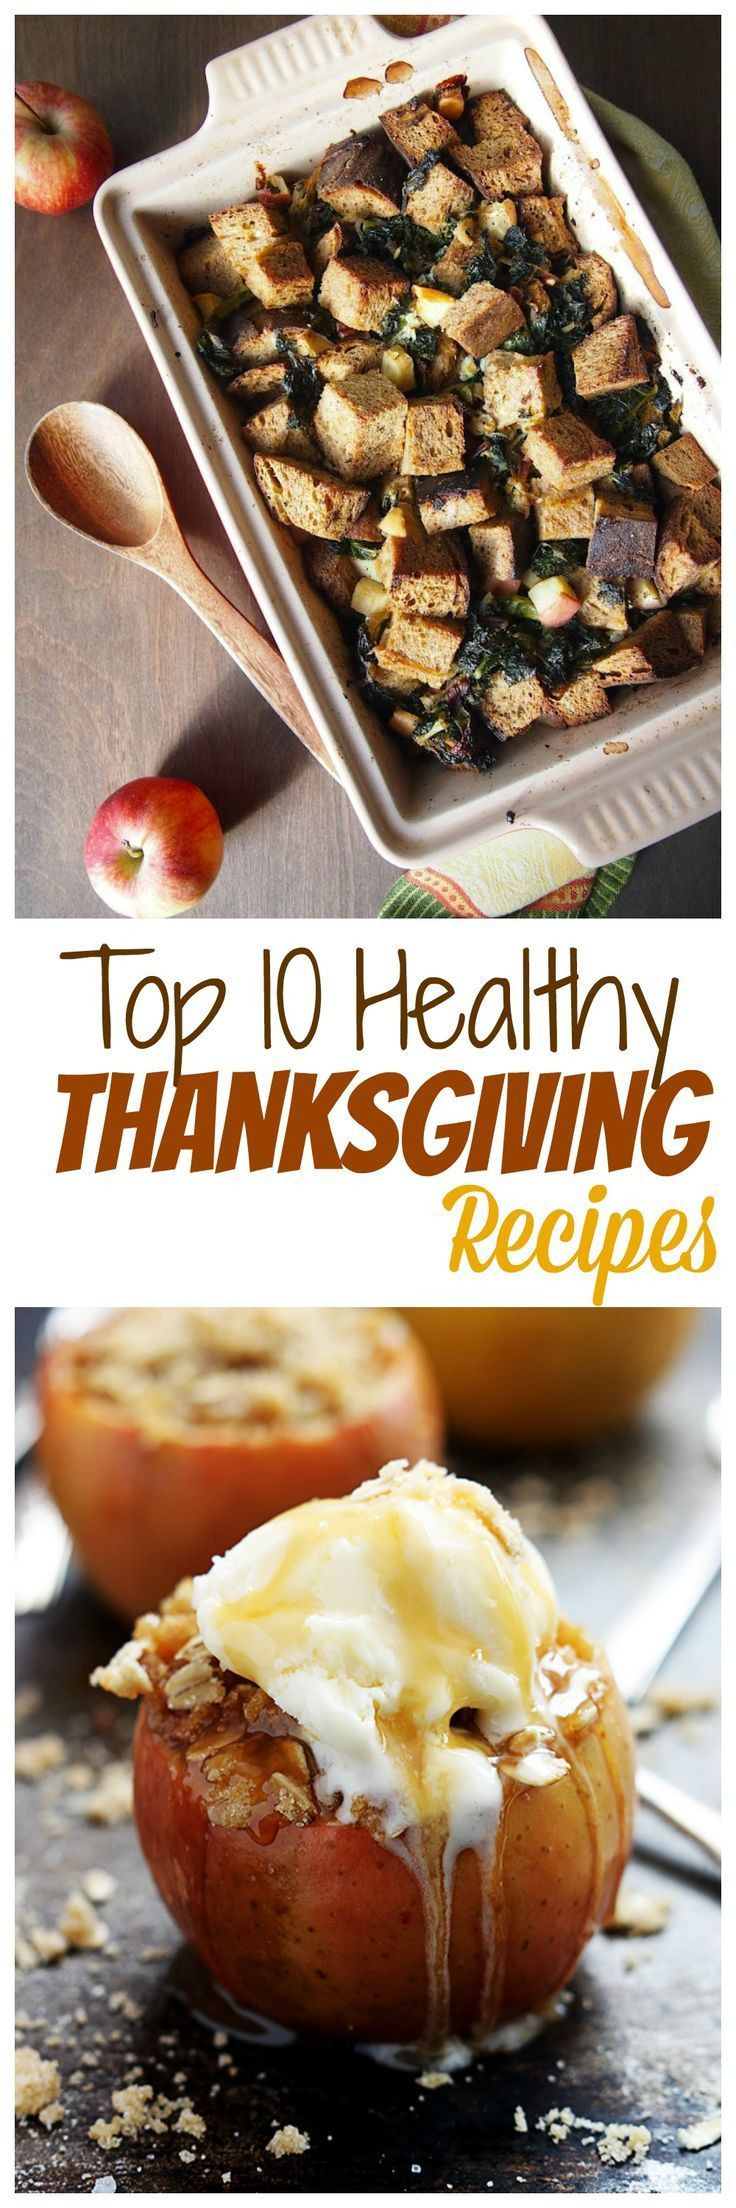 Low Calorie Thanksgiving Recipes
 [LIST] The Best Healthy Thanksgiving Recipes for Low